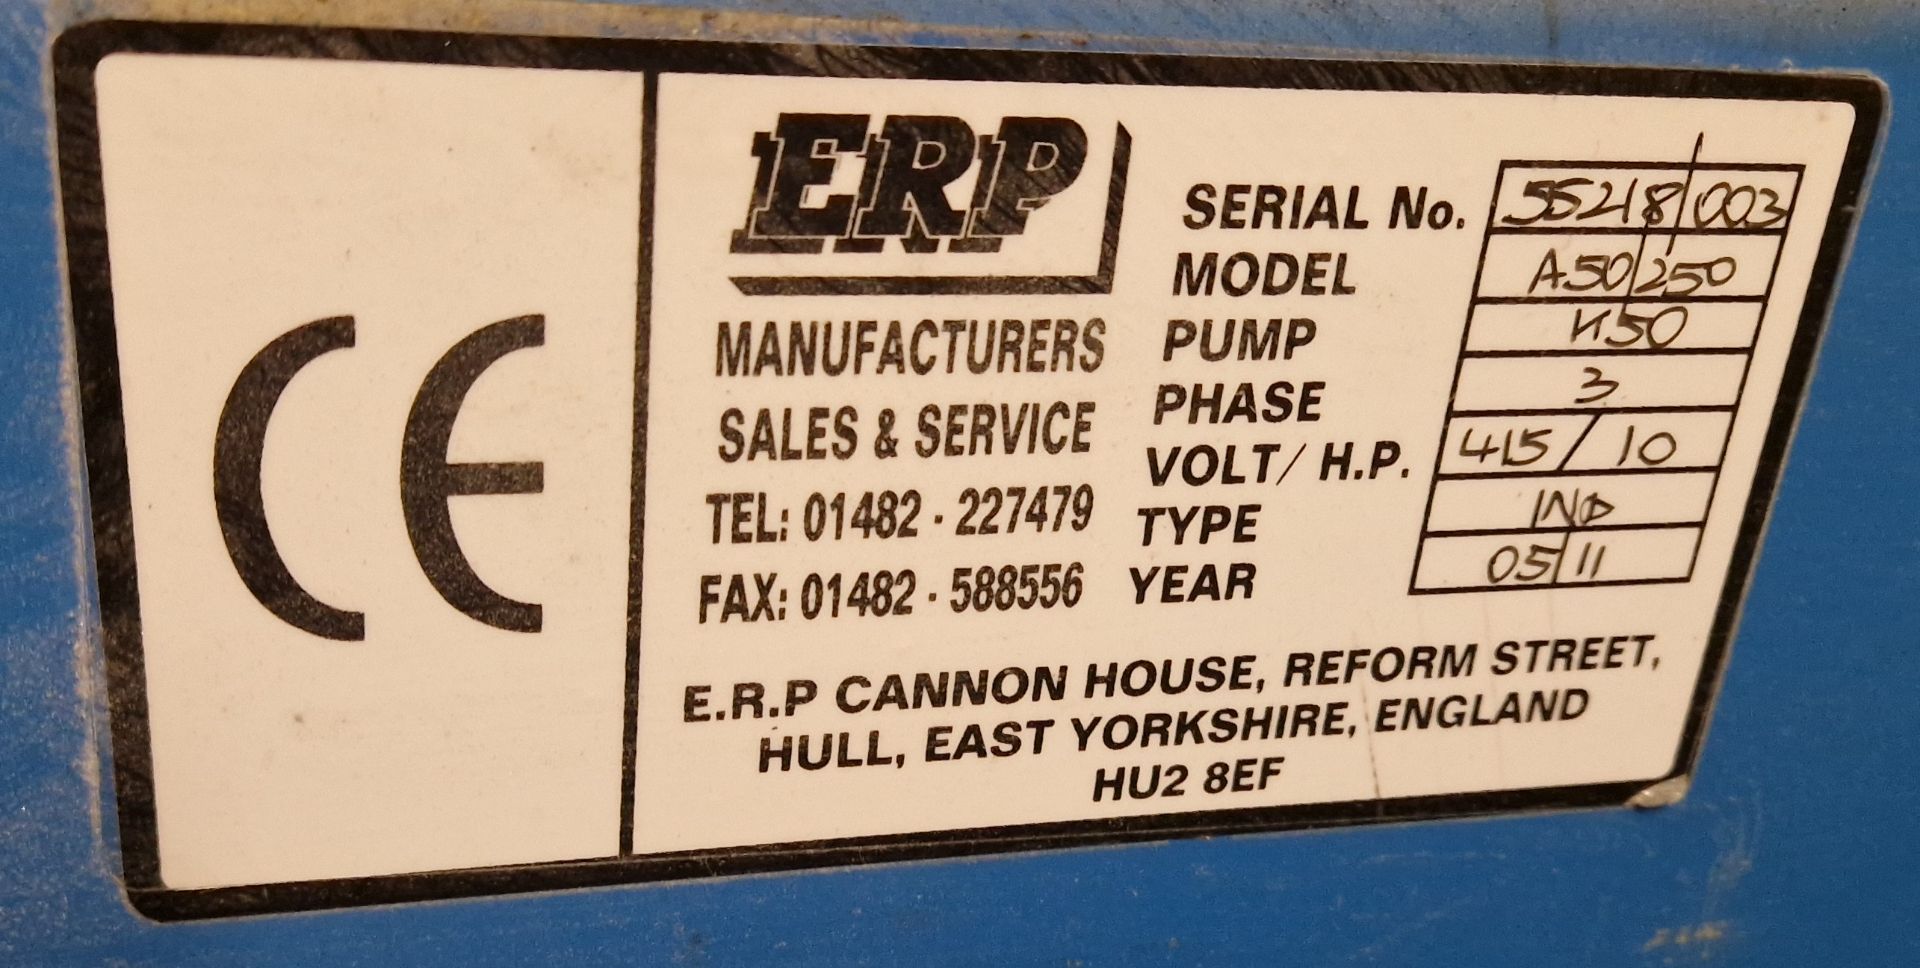 An ERP A50/250 Receiver mounted Vertical Twin Cylinder Air Compressor, Serial No. 55218/003 (Year - Image 2 of 3